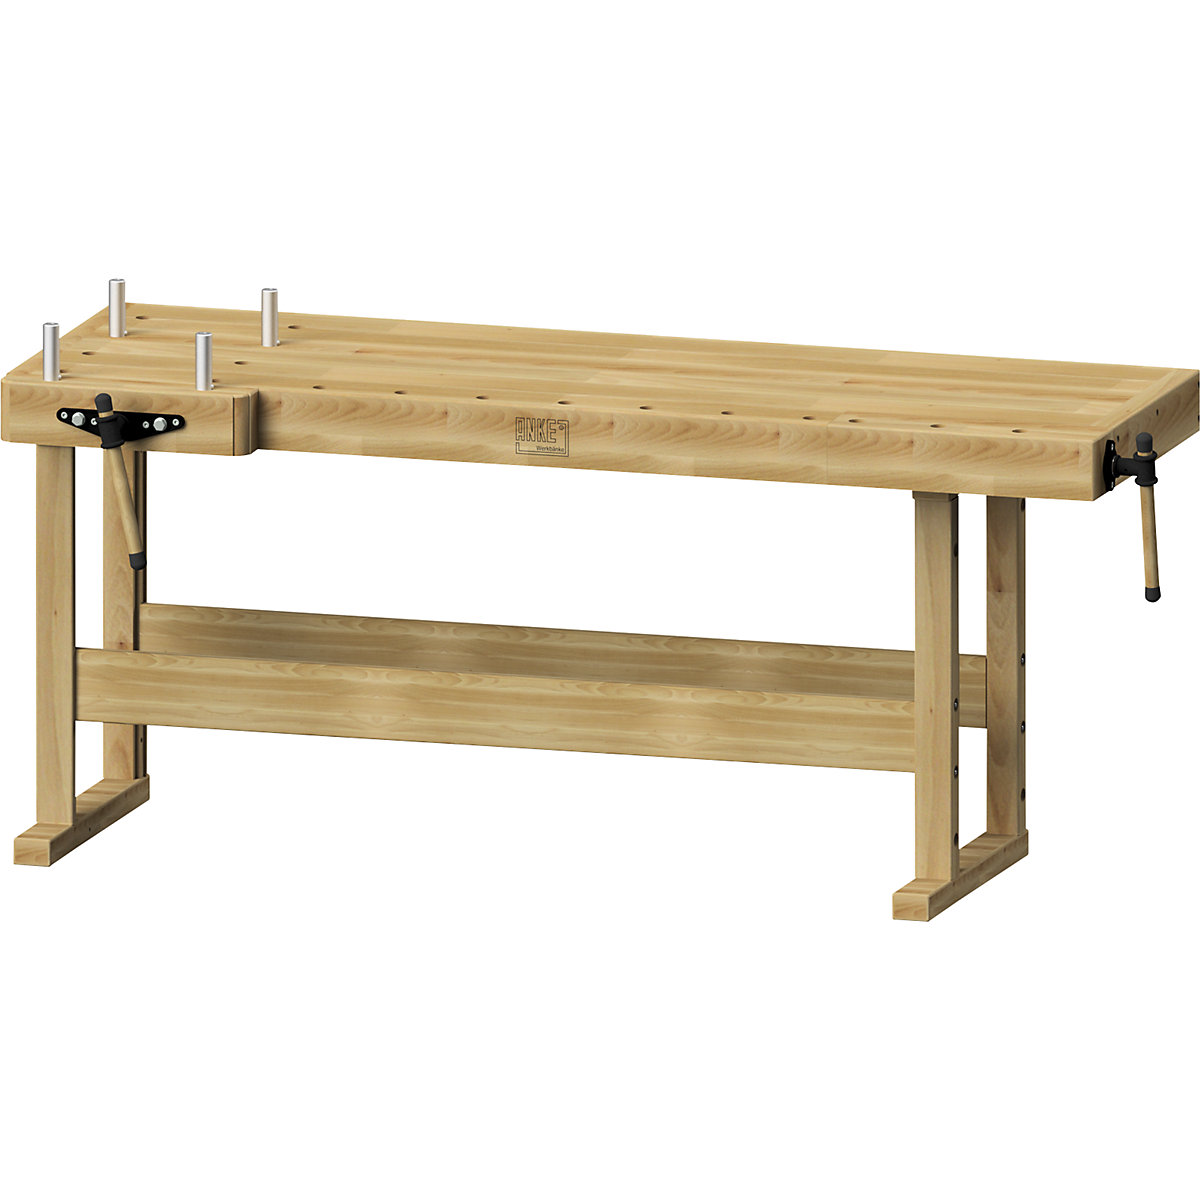 Professional planing bench - ANKE